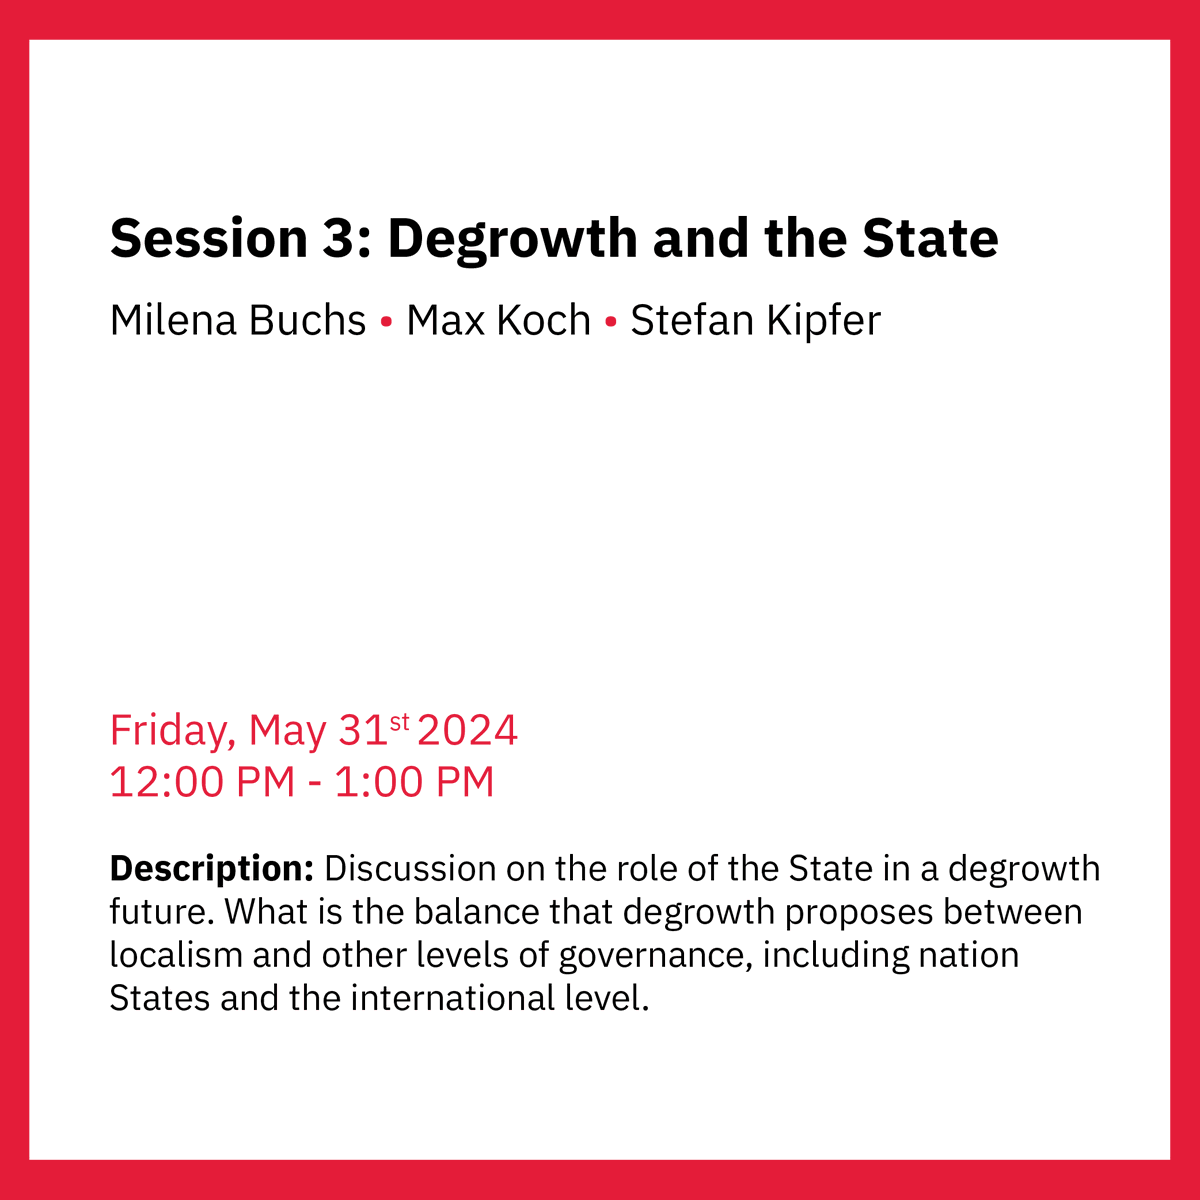 Join us for another session of #YorkUEUC's 23/24 Seminar Series “Aim High, Degrow: Dialogues On Degrowth” 🖥️🐌 This session features a discussion on the role of the State in a degrowth future. For more information, please visit: bit.ly/3RQFROz #YorkU